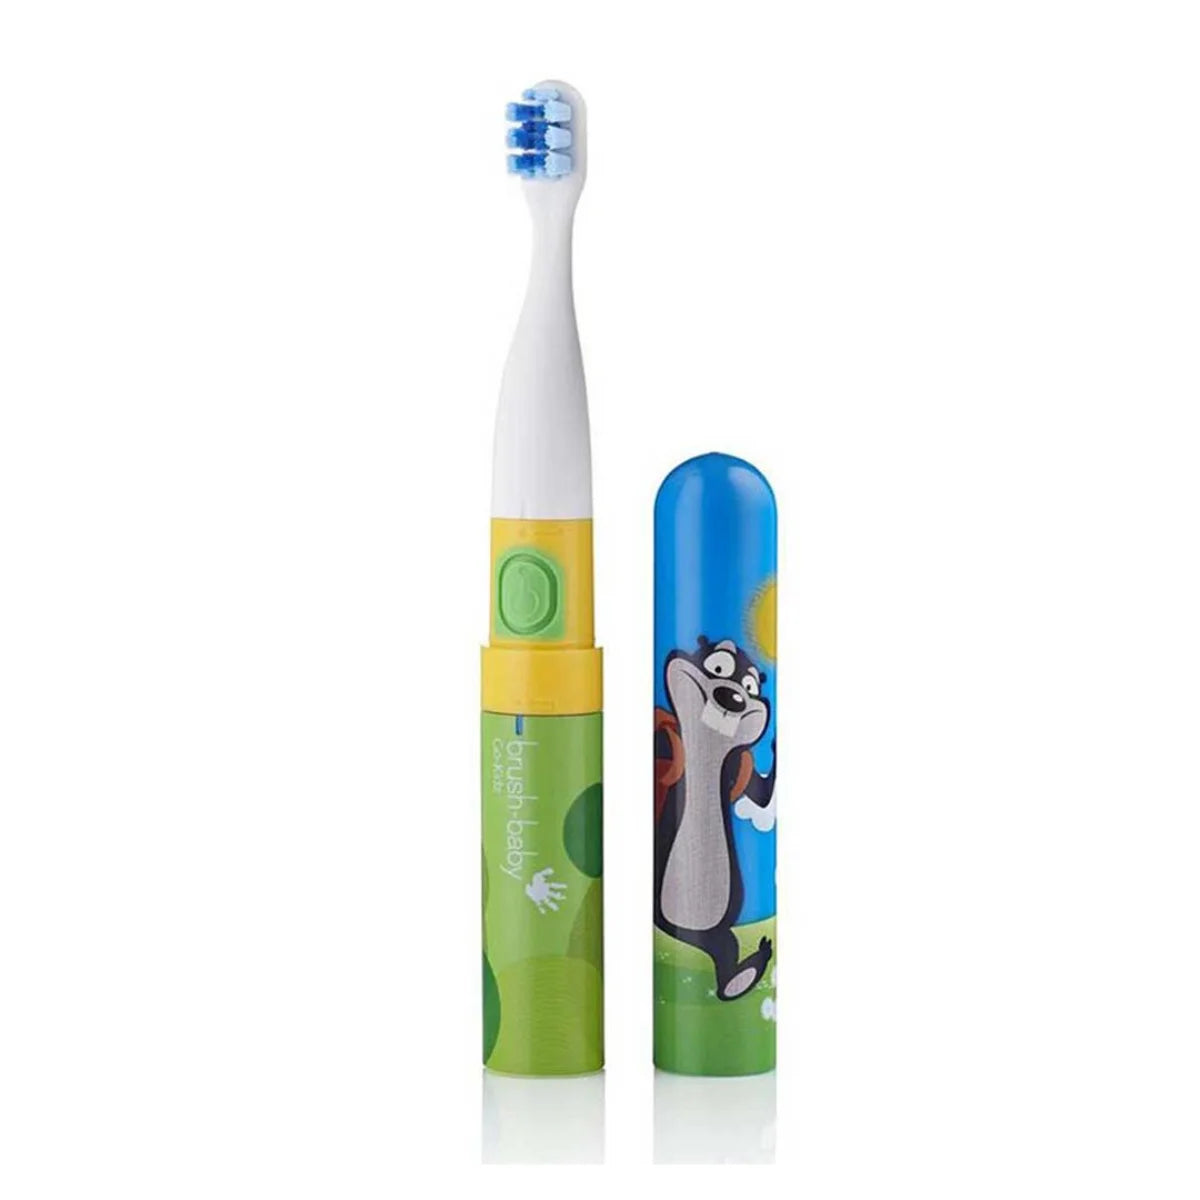 Mikey Travel Go-Kidz Child Electric Toothbrush with brush cover 